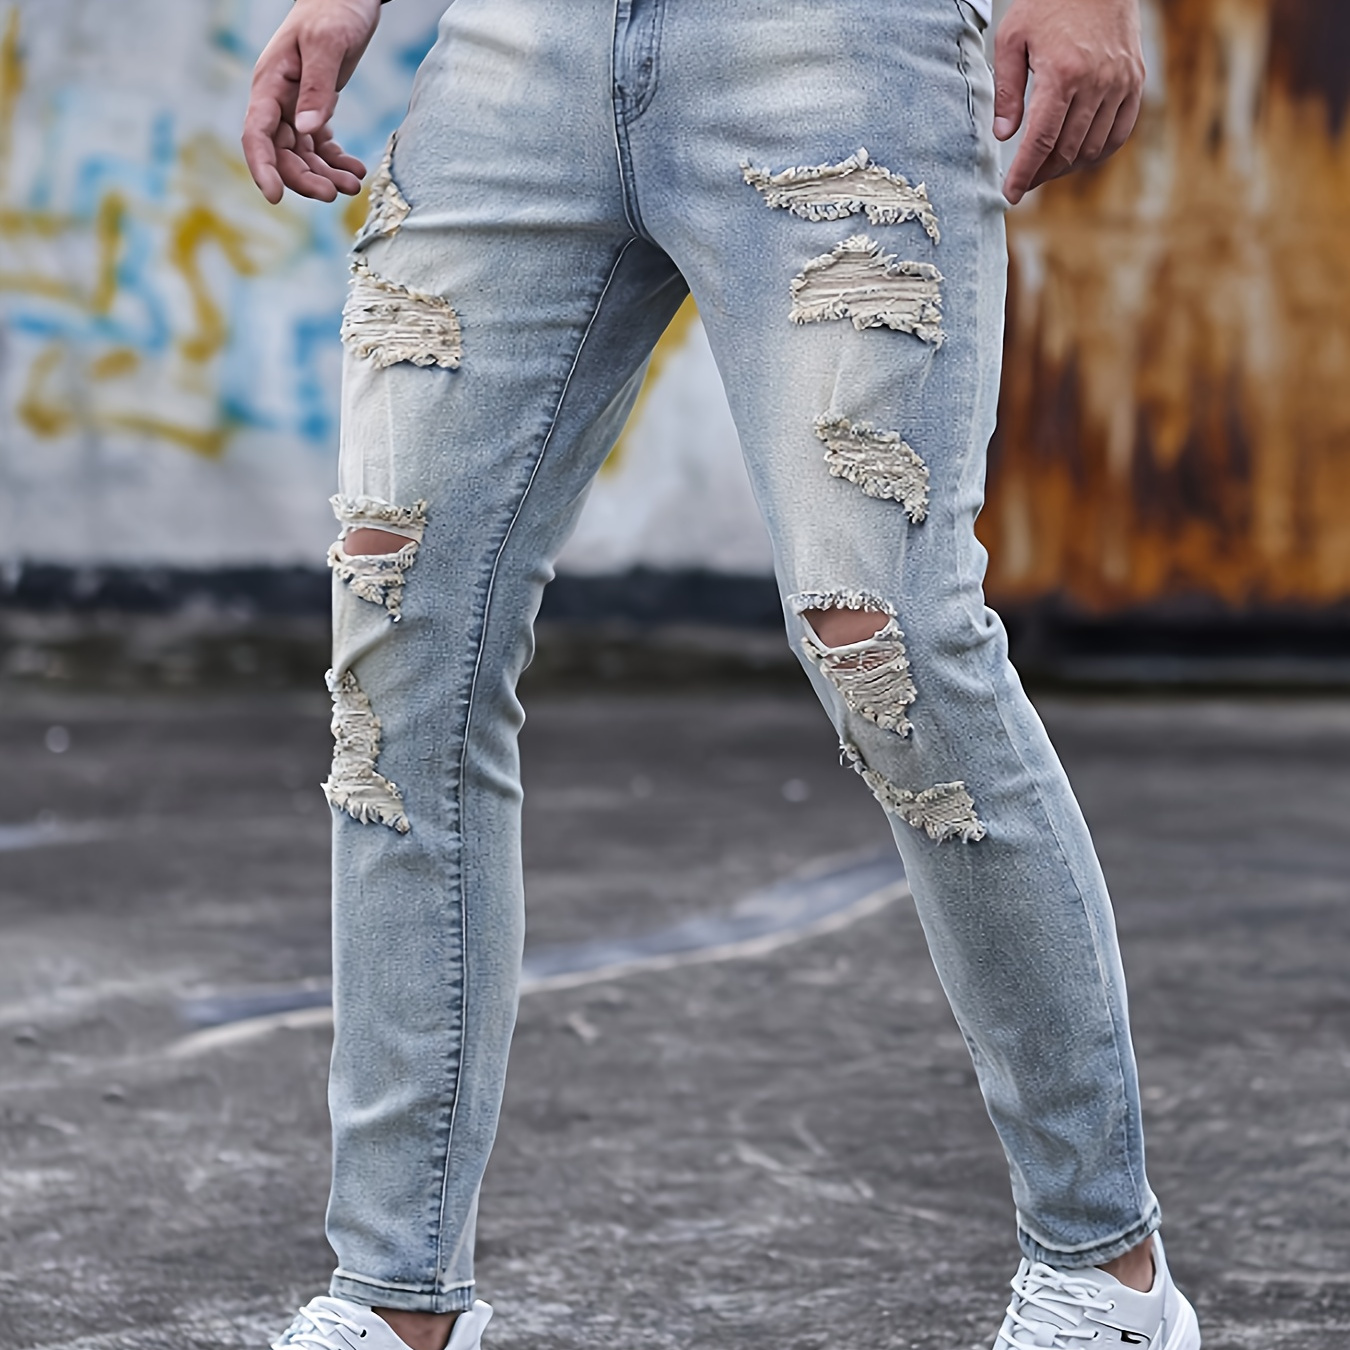 

Men's Slim Fit And Cuffed Denim Jeans With Ripped And Distressed Pieces, Chic And Stylish Jeans For Street Wear